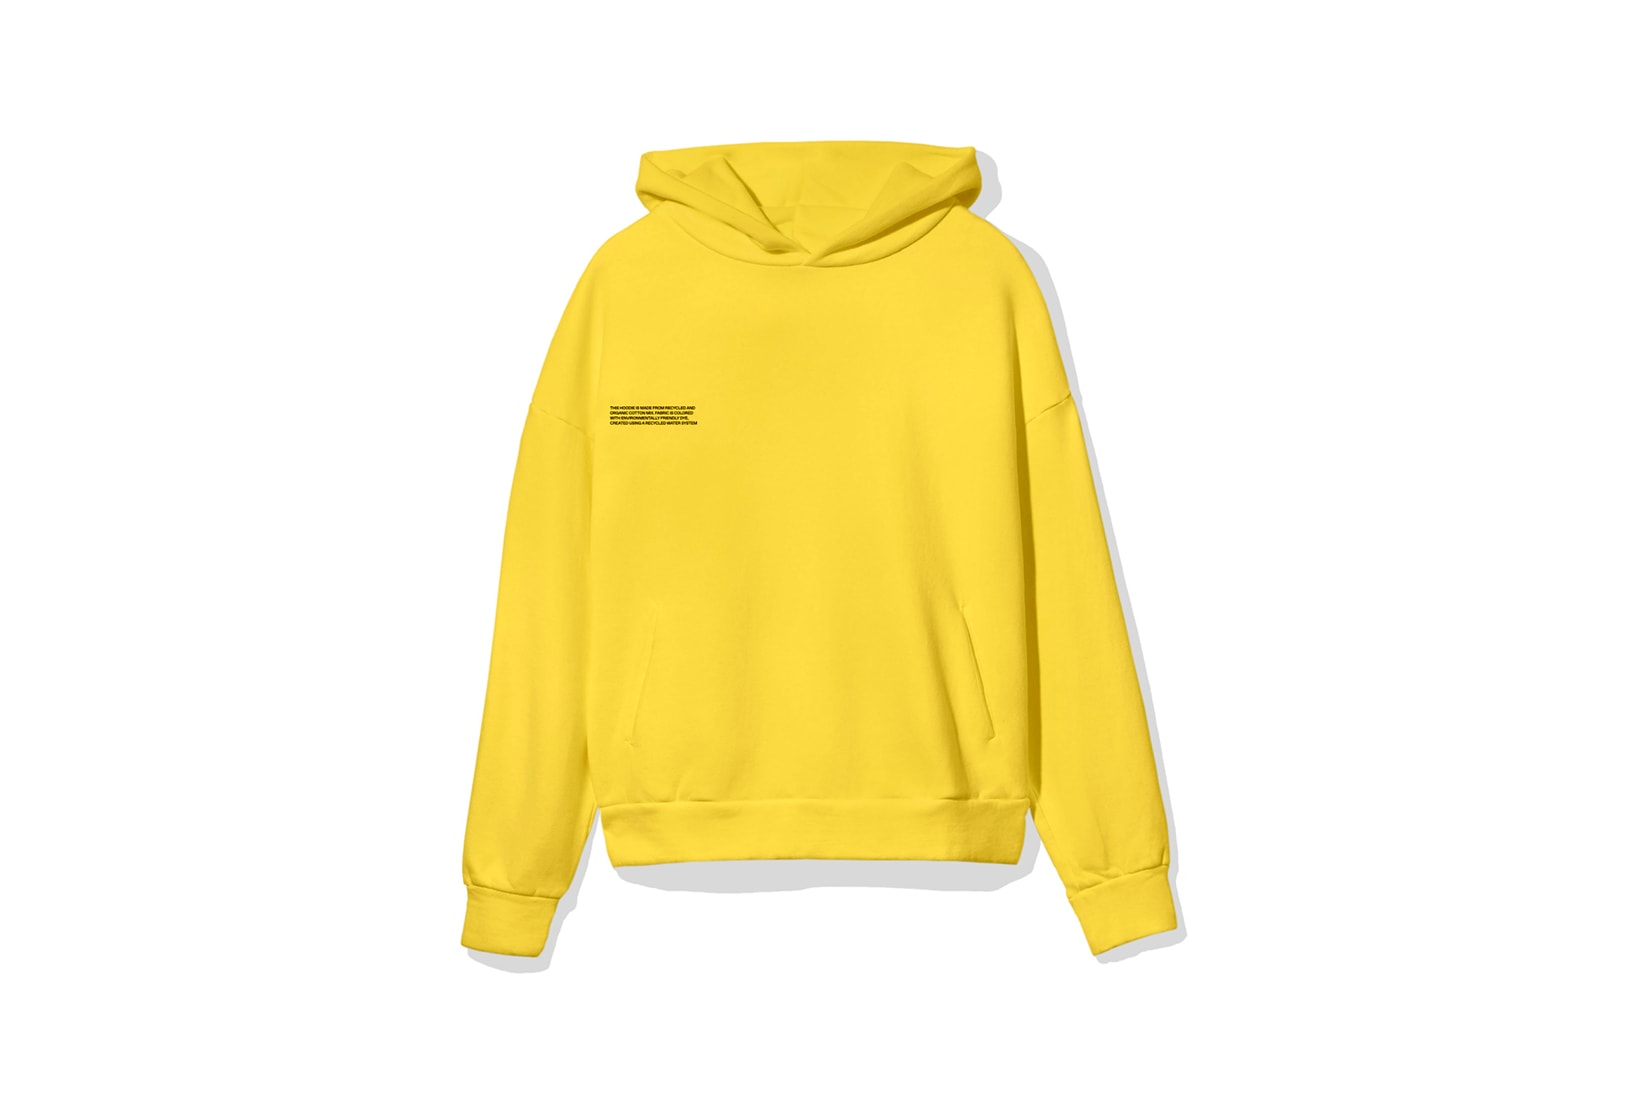 Pangaia "7 Pop Color" Collection Hoodie Yellow